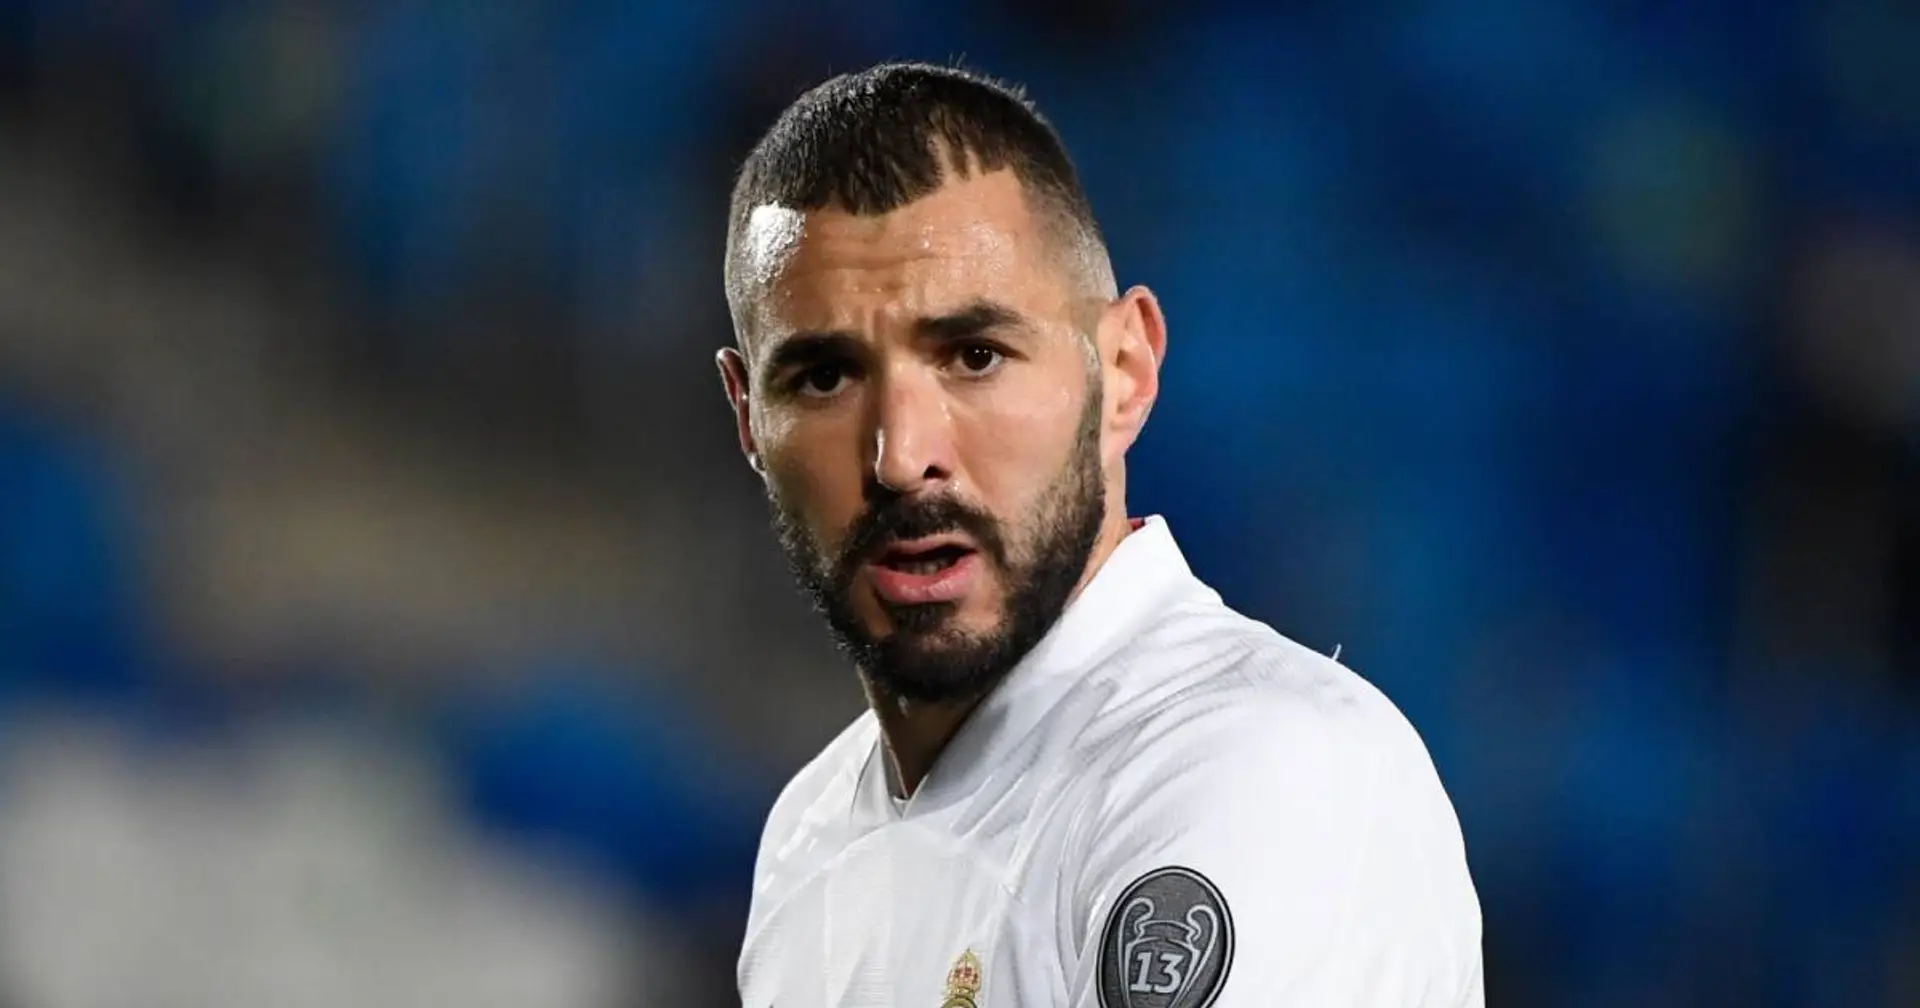 Benzema to stand trial for Valbuena sex tape scandal in October this year